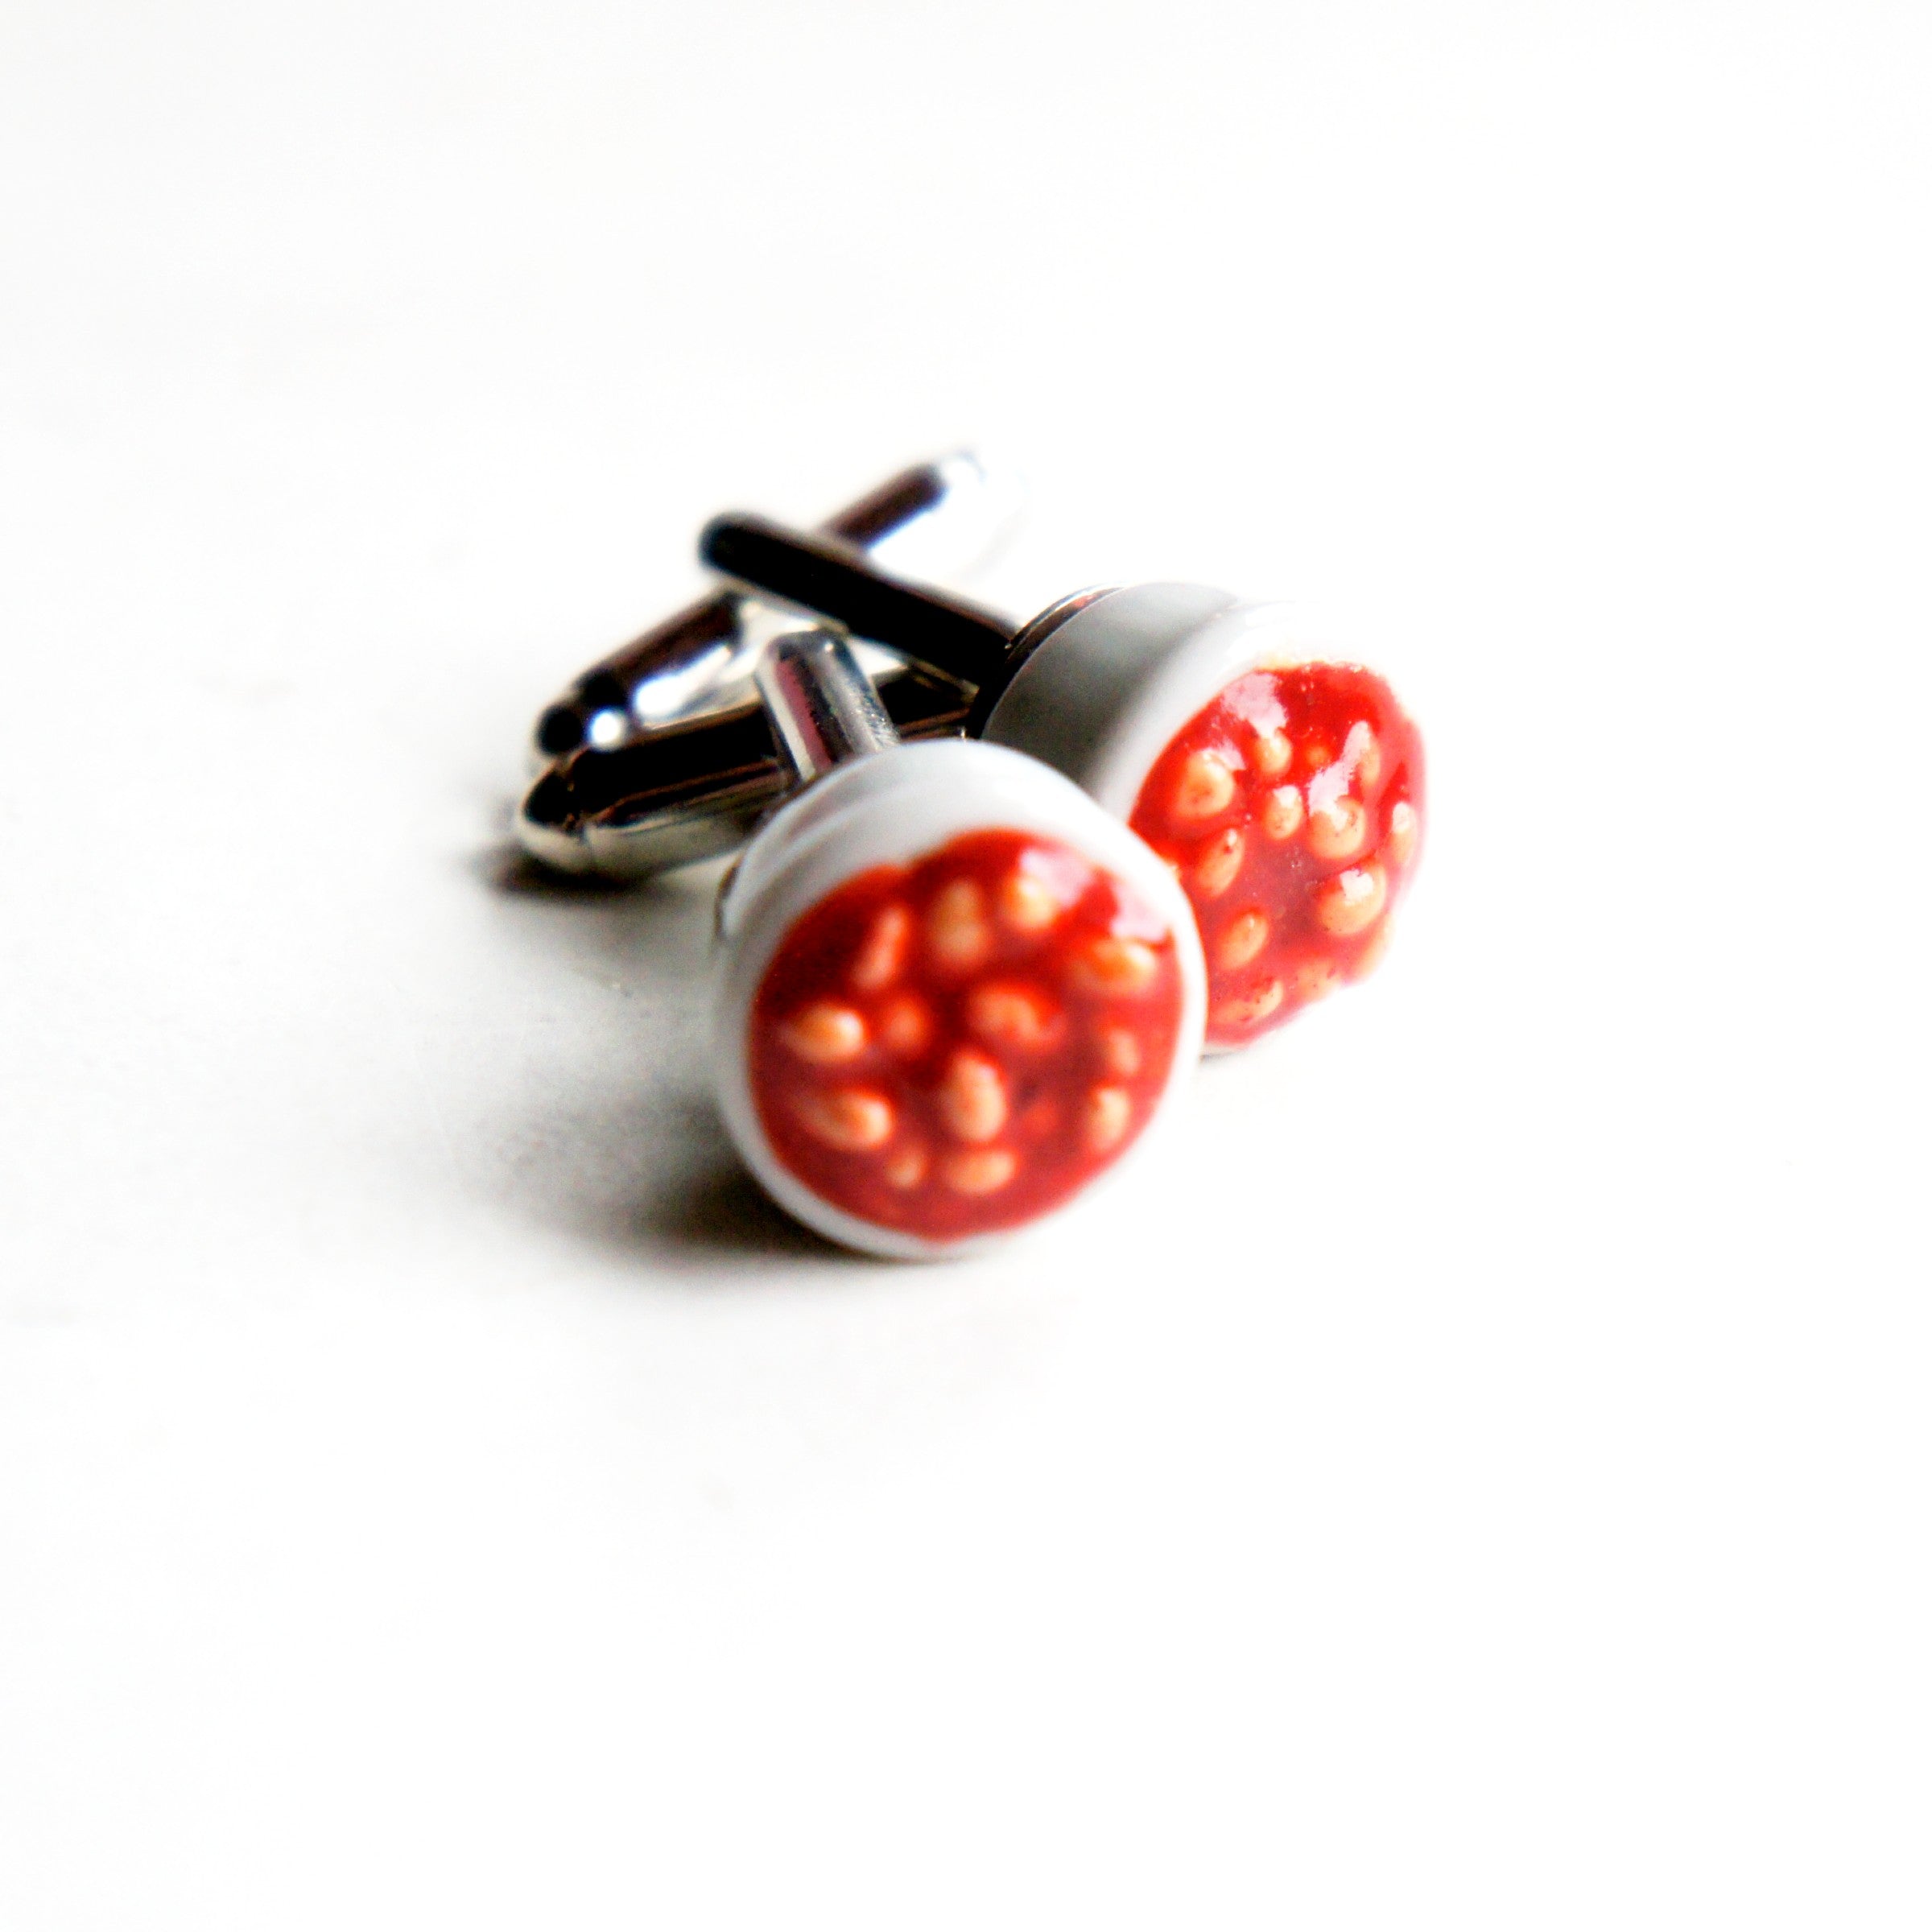 Baked Beans Cuff Links - Jillicious charms and accessories